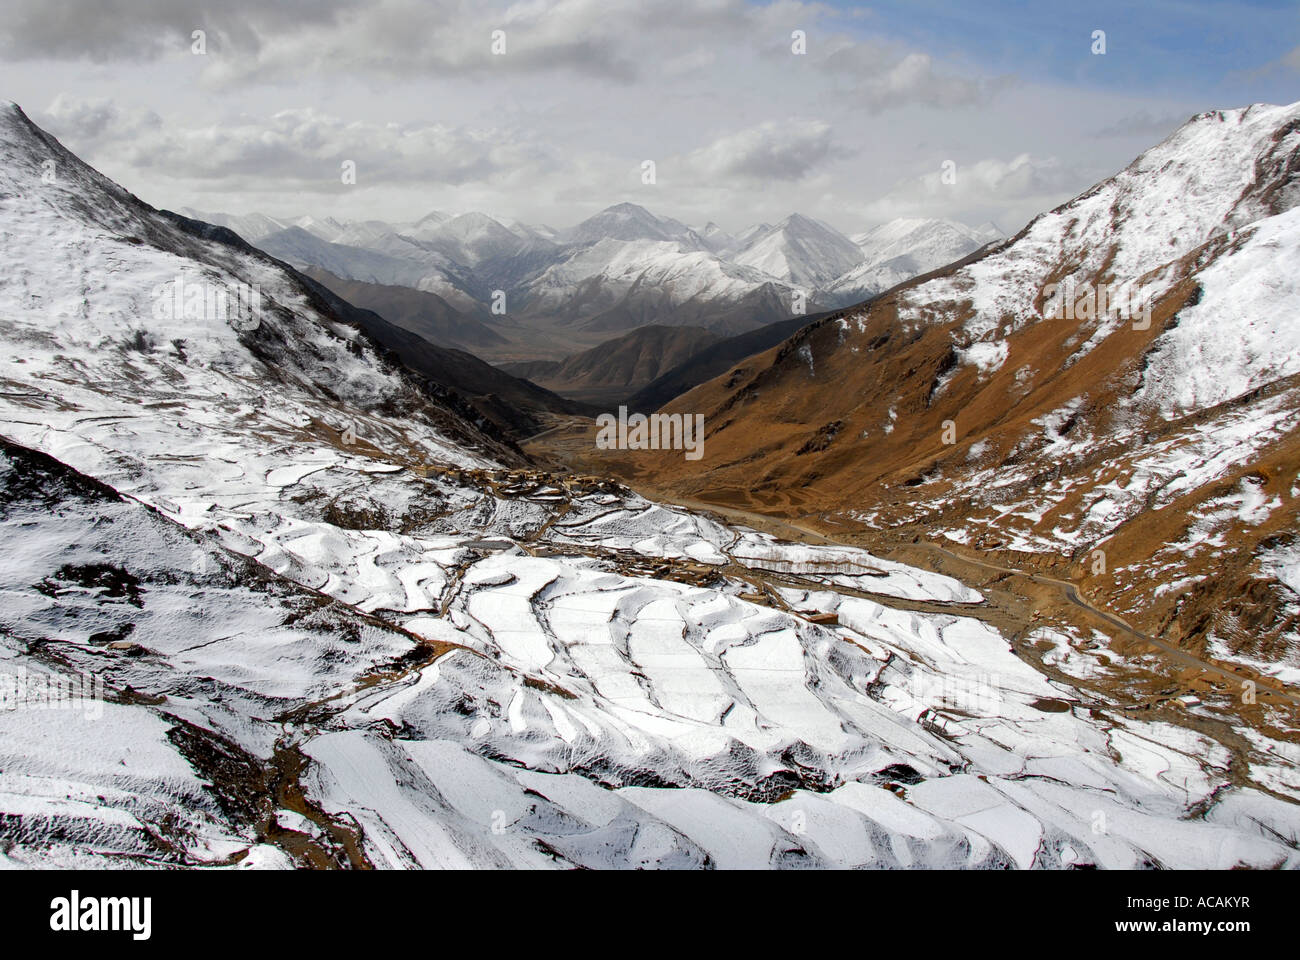 Village on snow covered slope with terraces and mountains Yerpa Tibet China Stock Photo